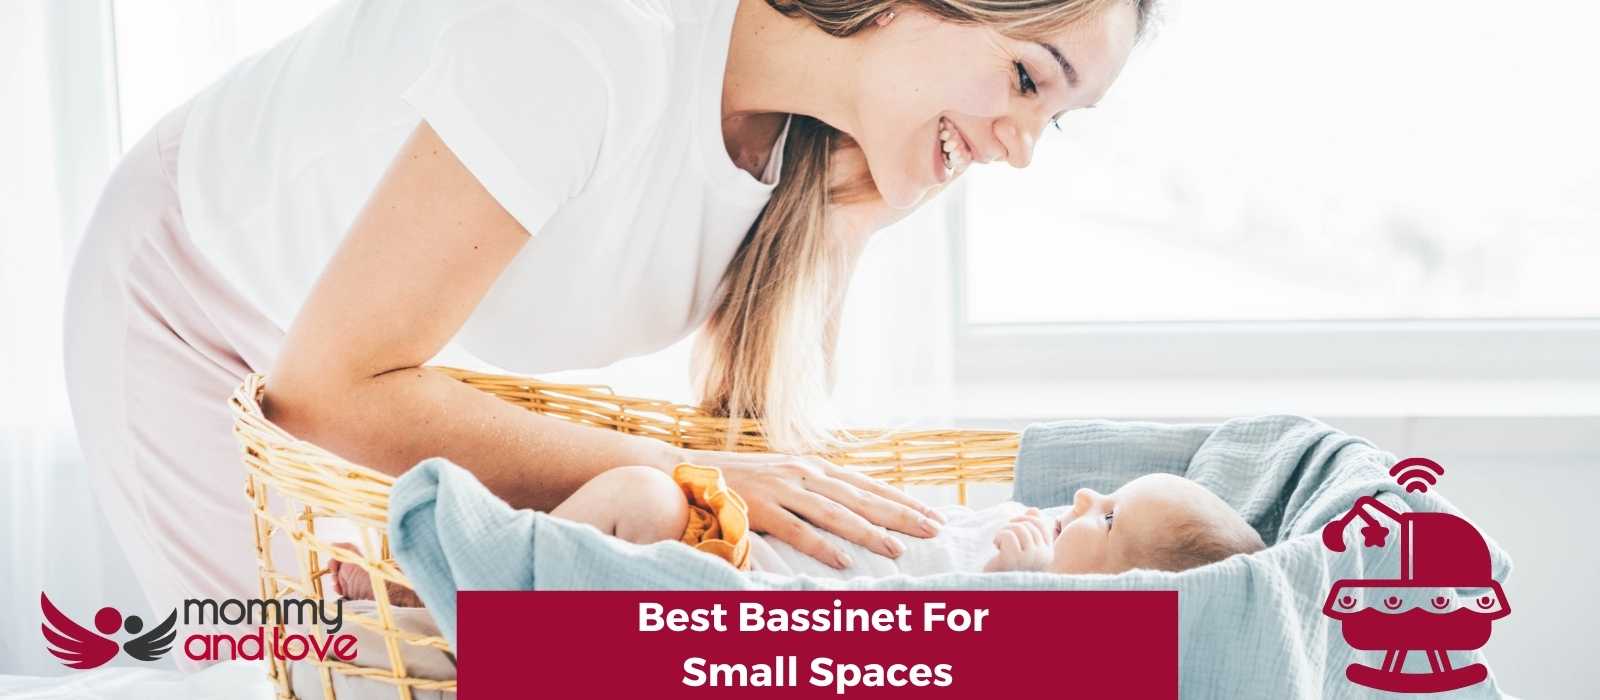 Best Bassinet For Small Spaces